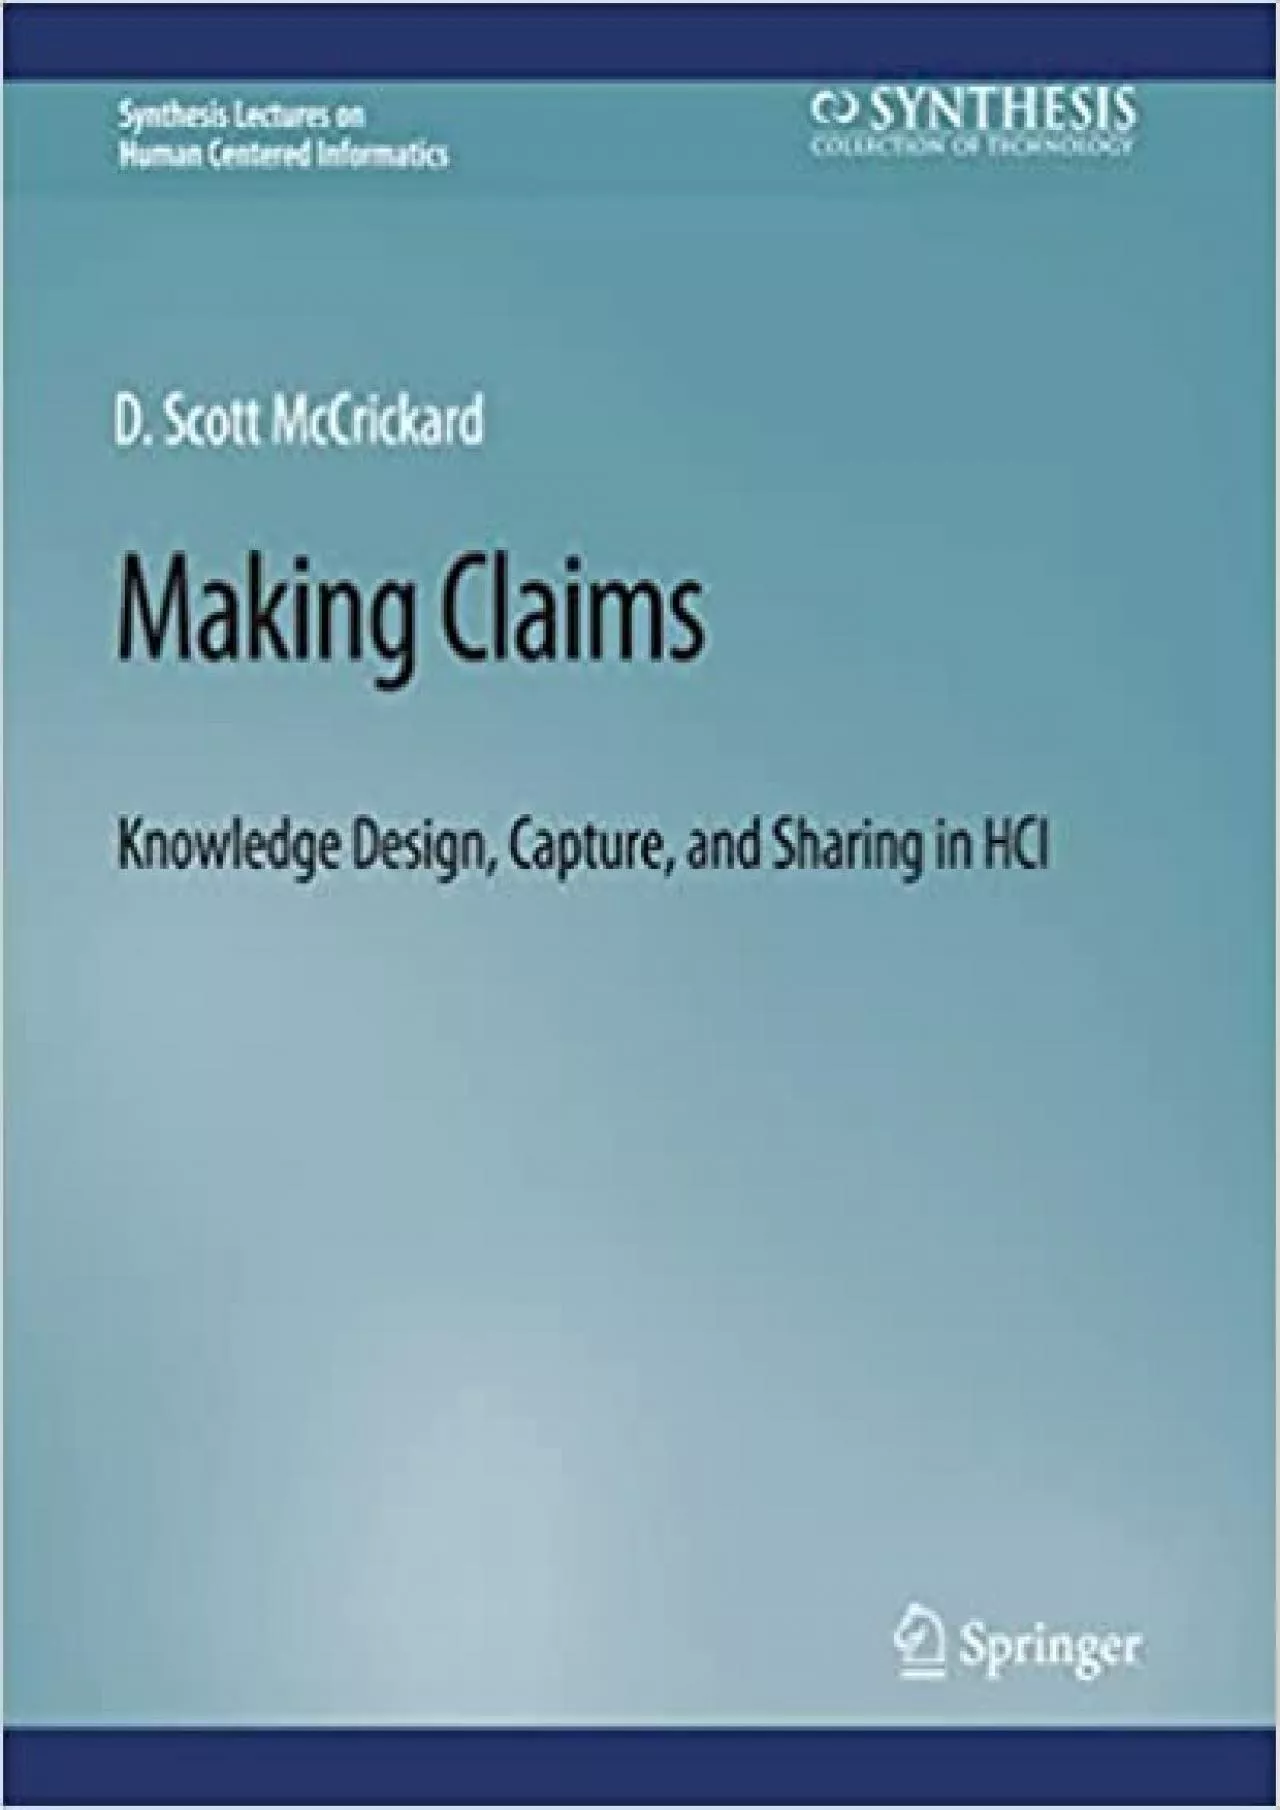 (BOOK)-Making Claims Knowledge Design Capture and Sharing in HCI (Synthesis Lectures on